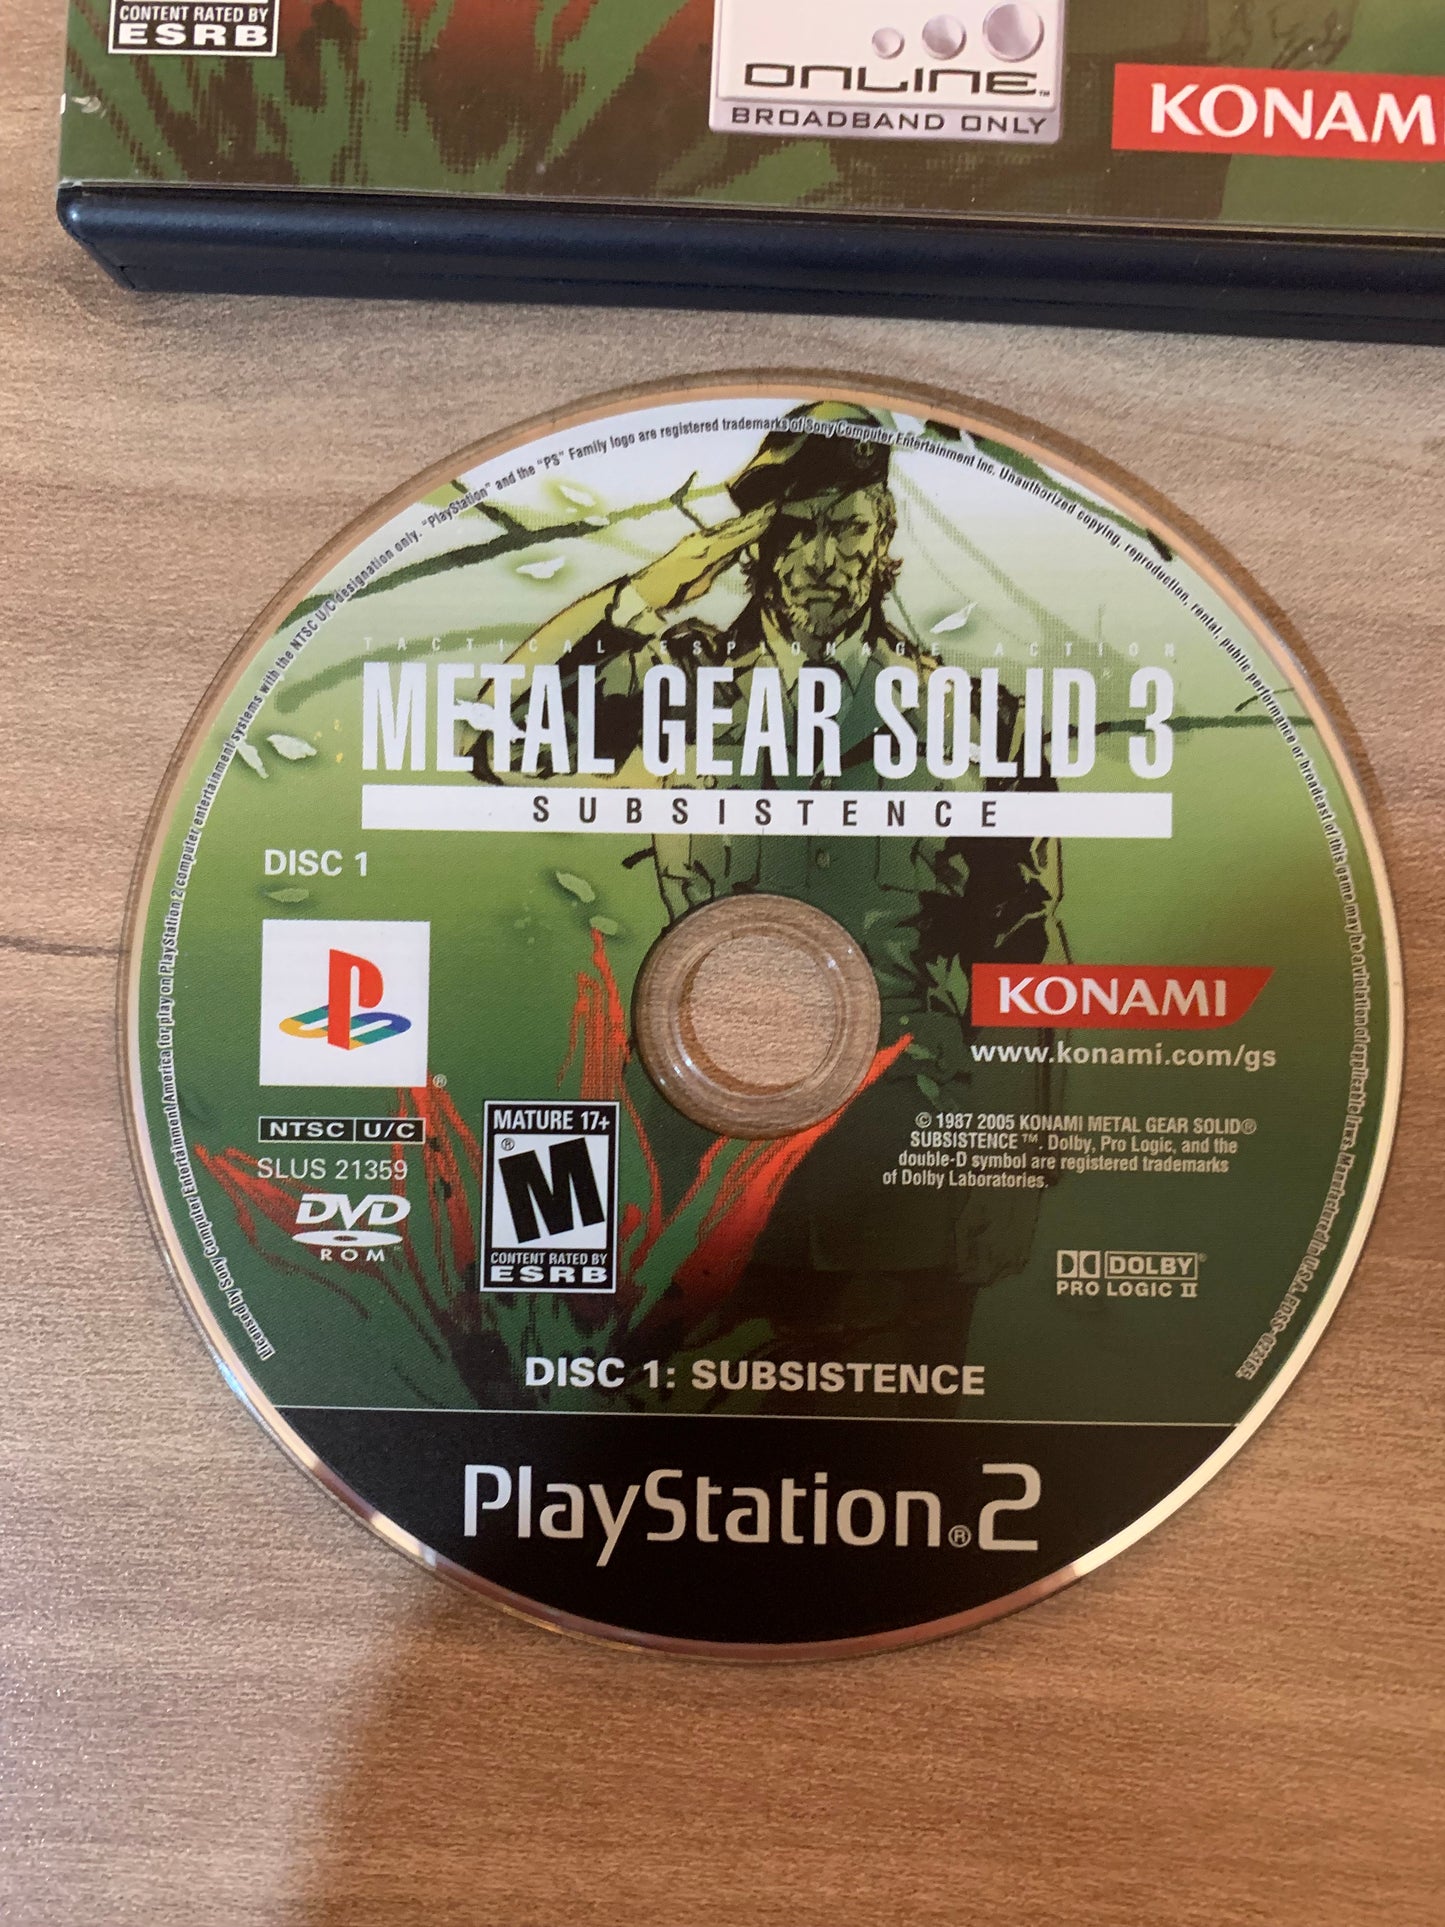 SONY PLAYSTATiON 2 [PS2] | METAL GEAR SOLiD 3 SUBSiSTENCE